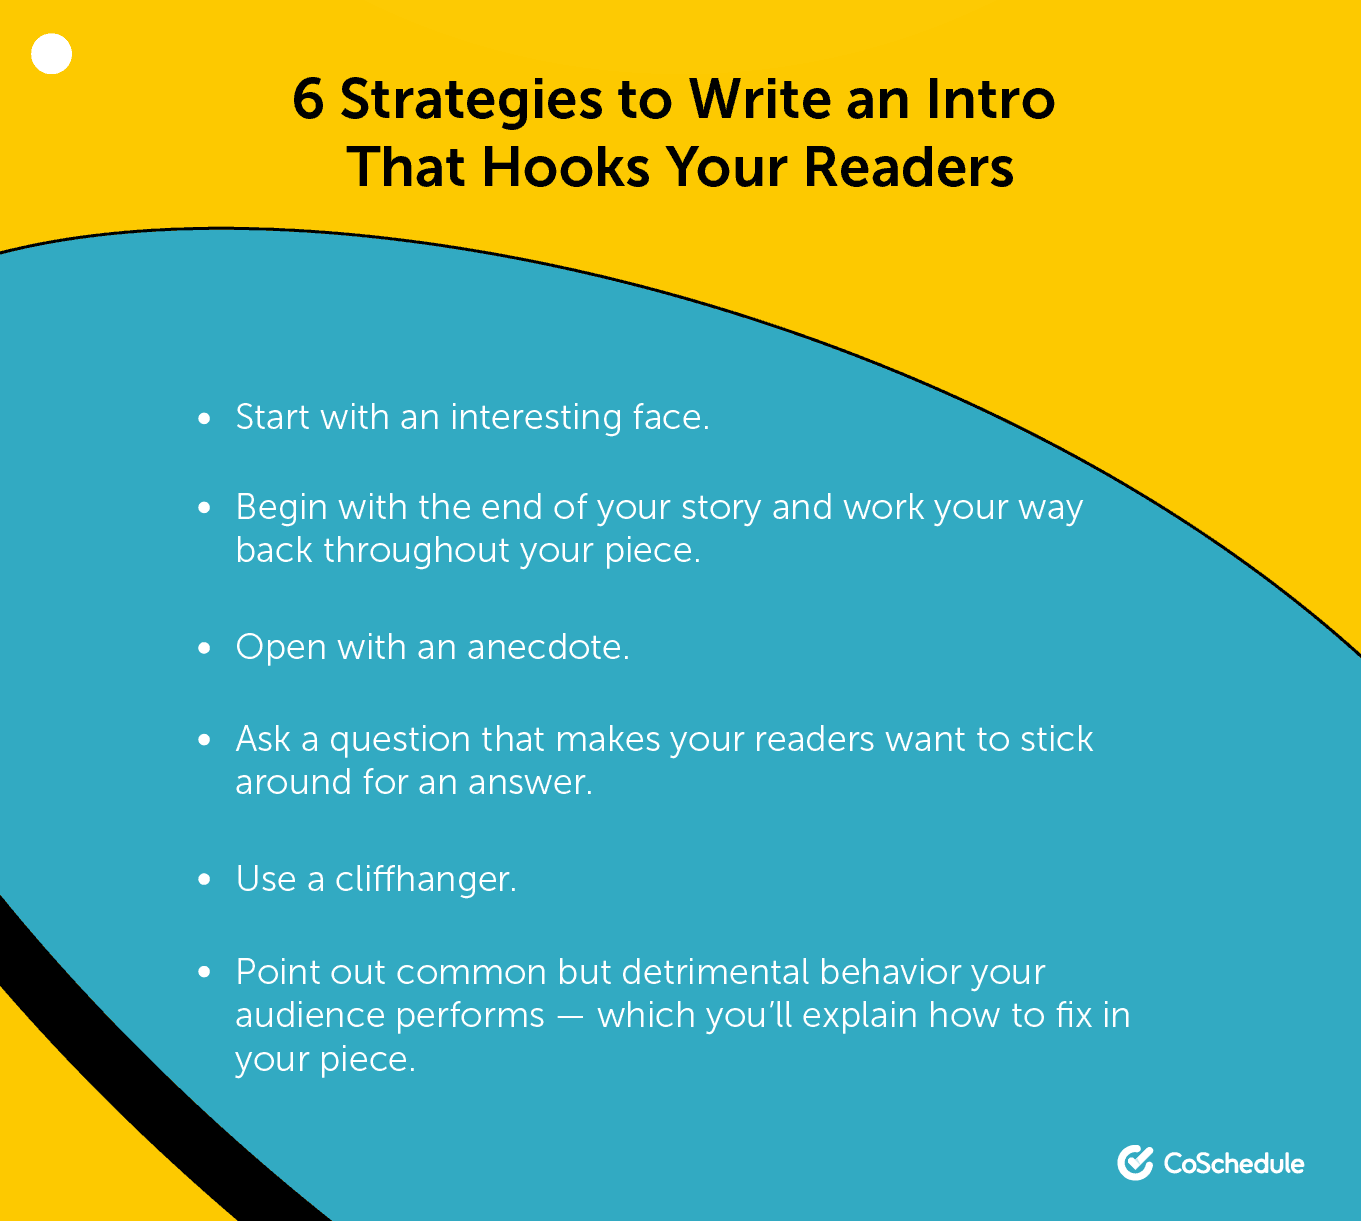 Write an intro that hooks readers